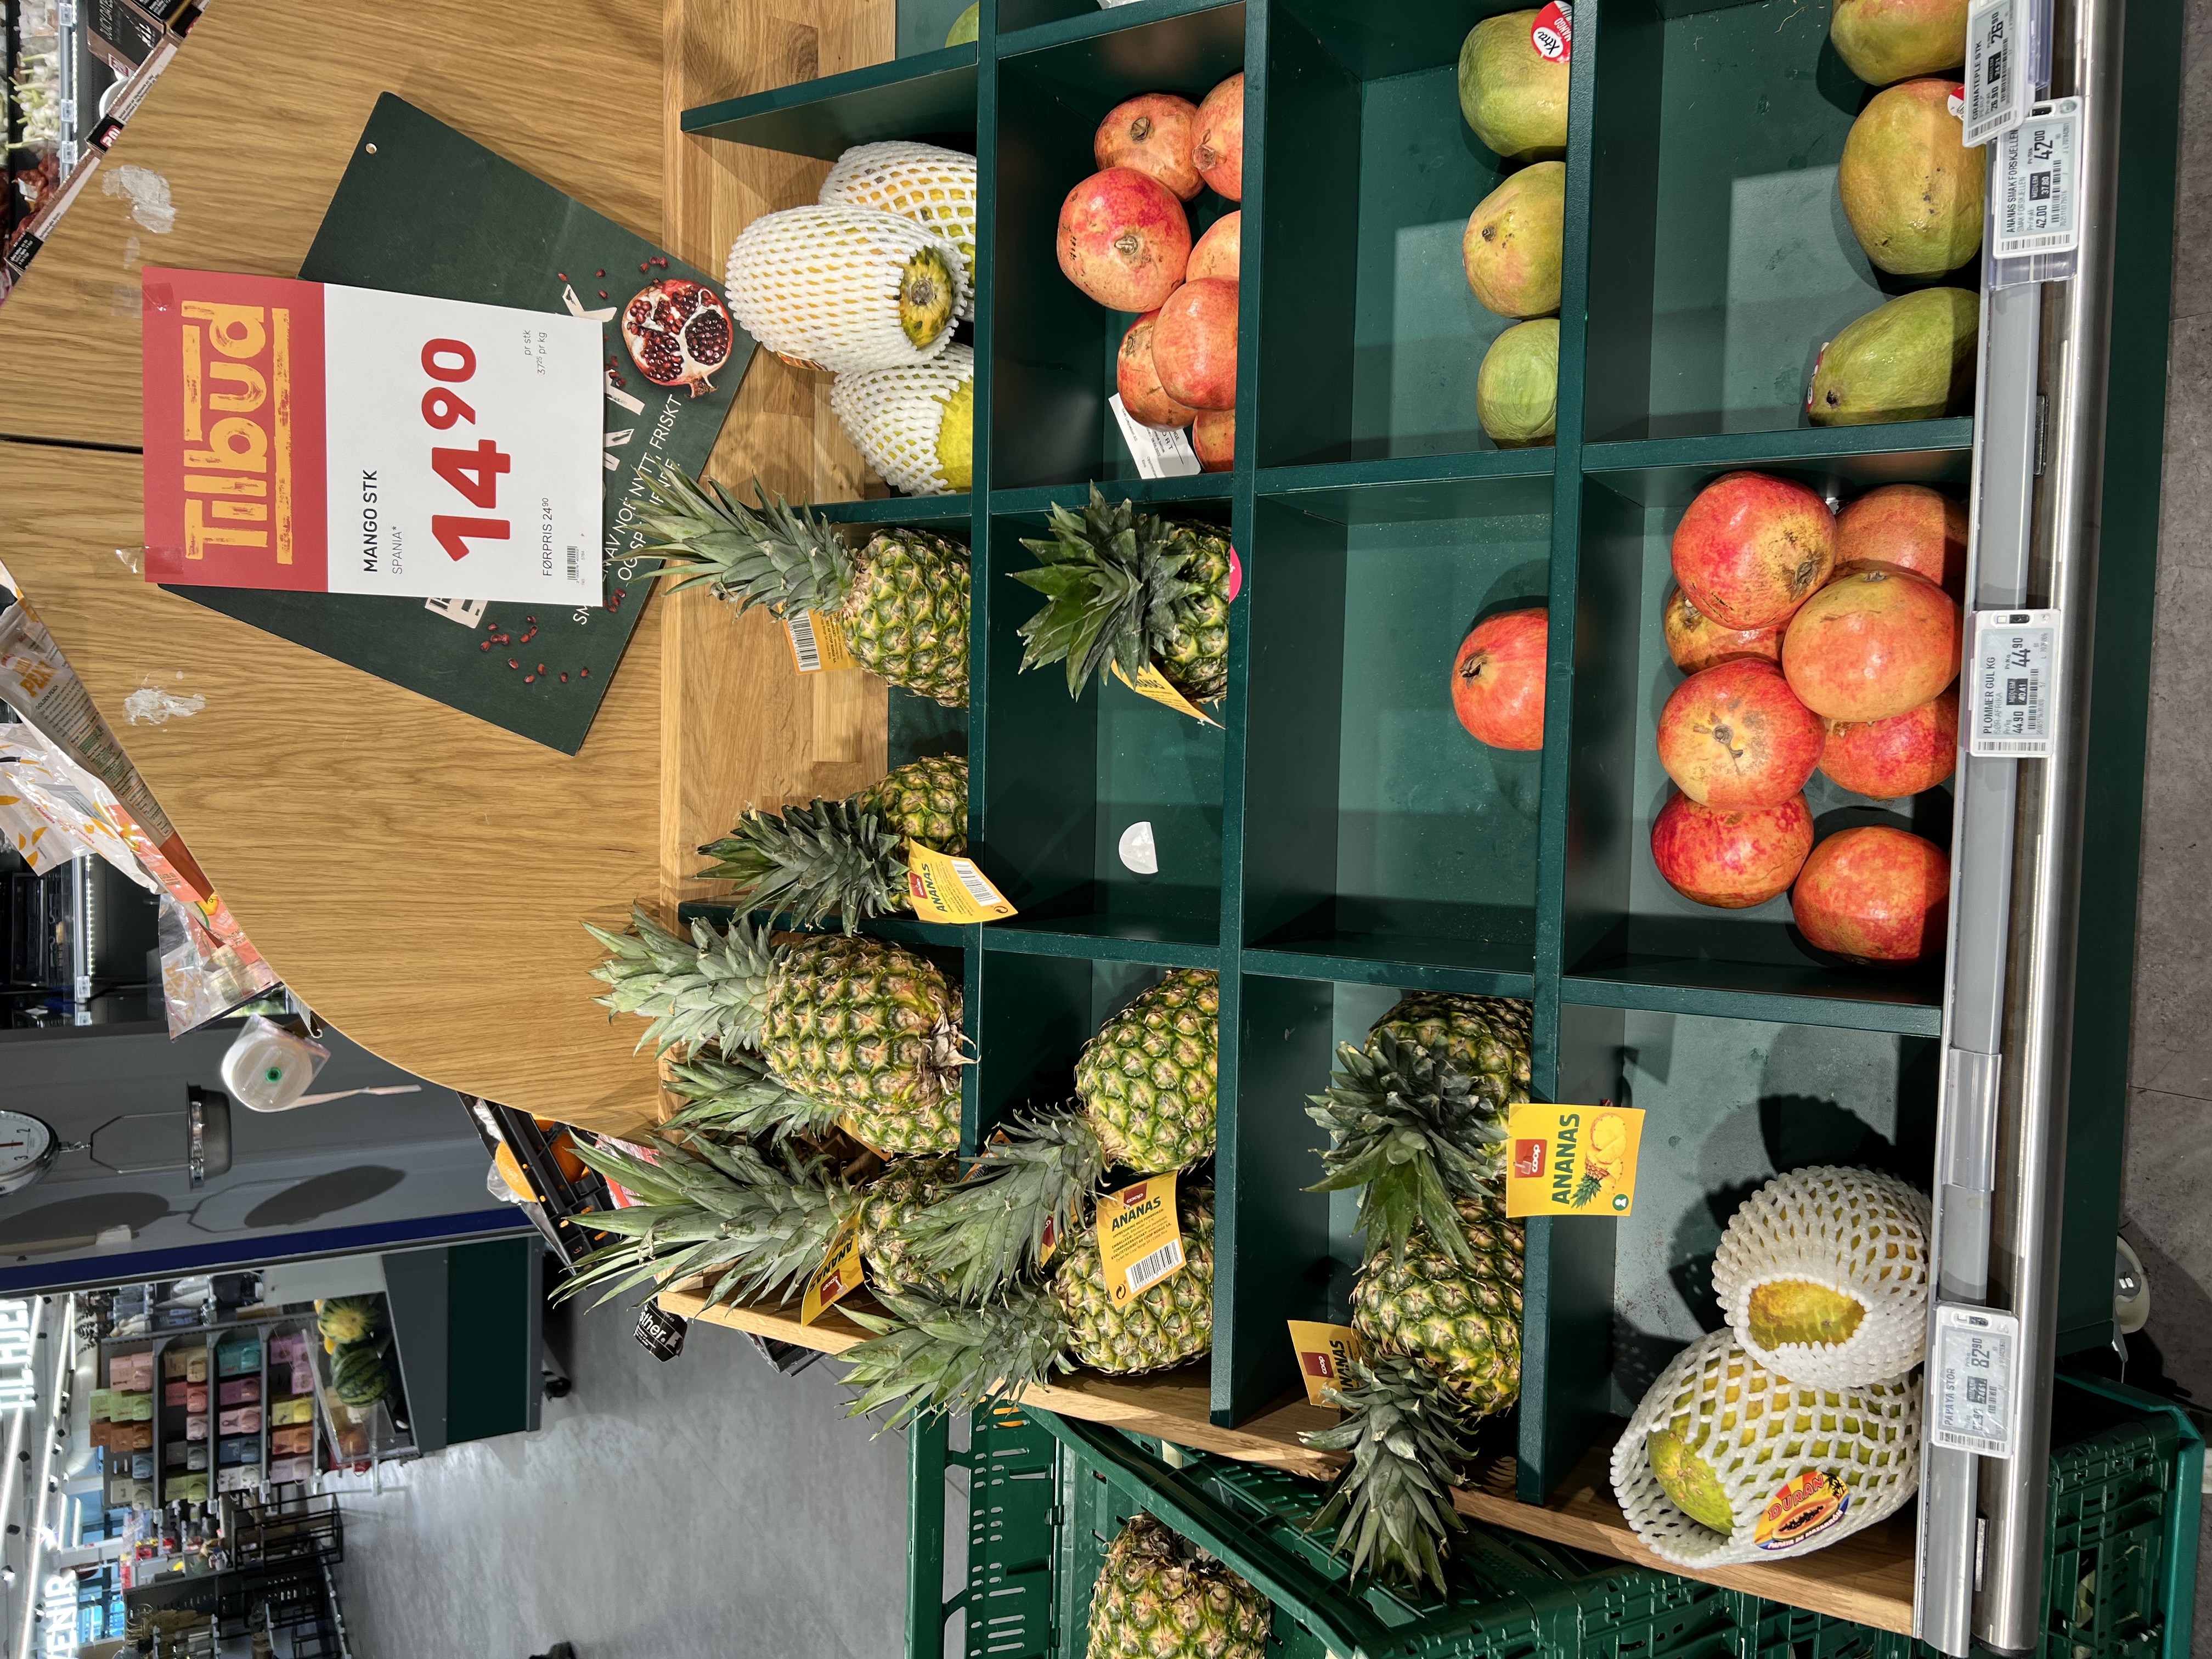 A pineapple in a the main grocery store in Longyearbyen. The experience left me… confused.